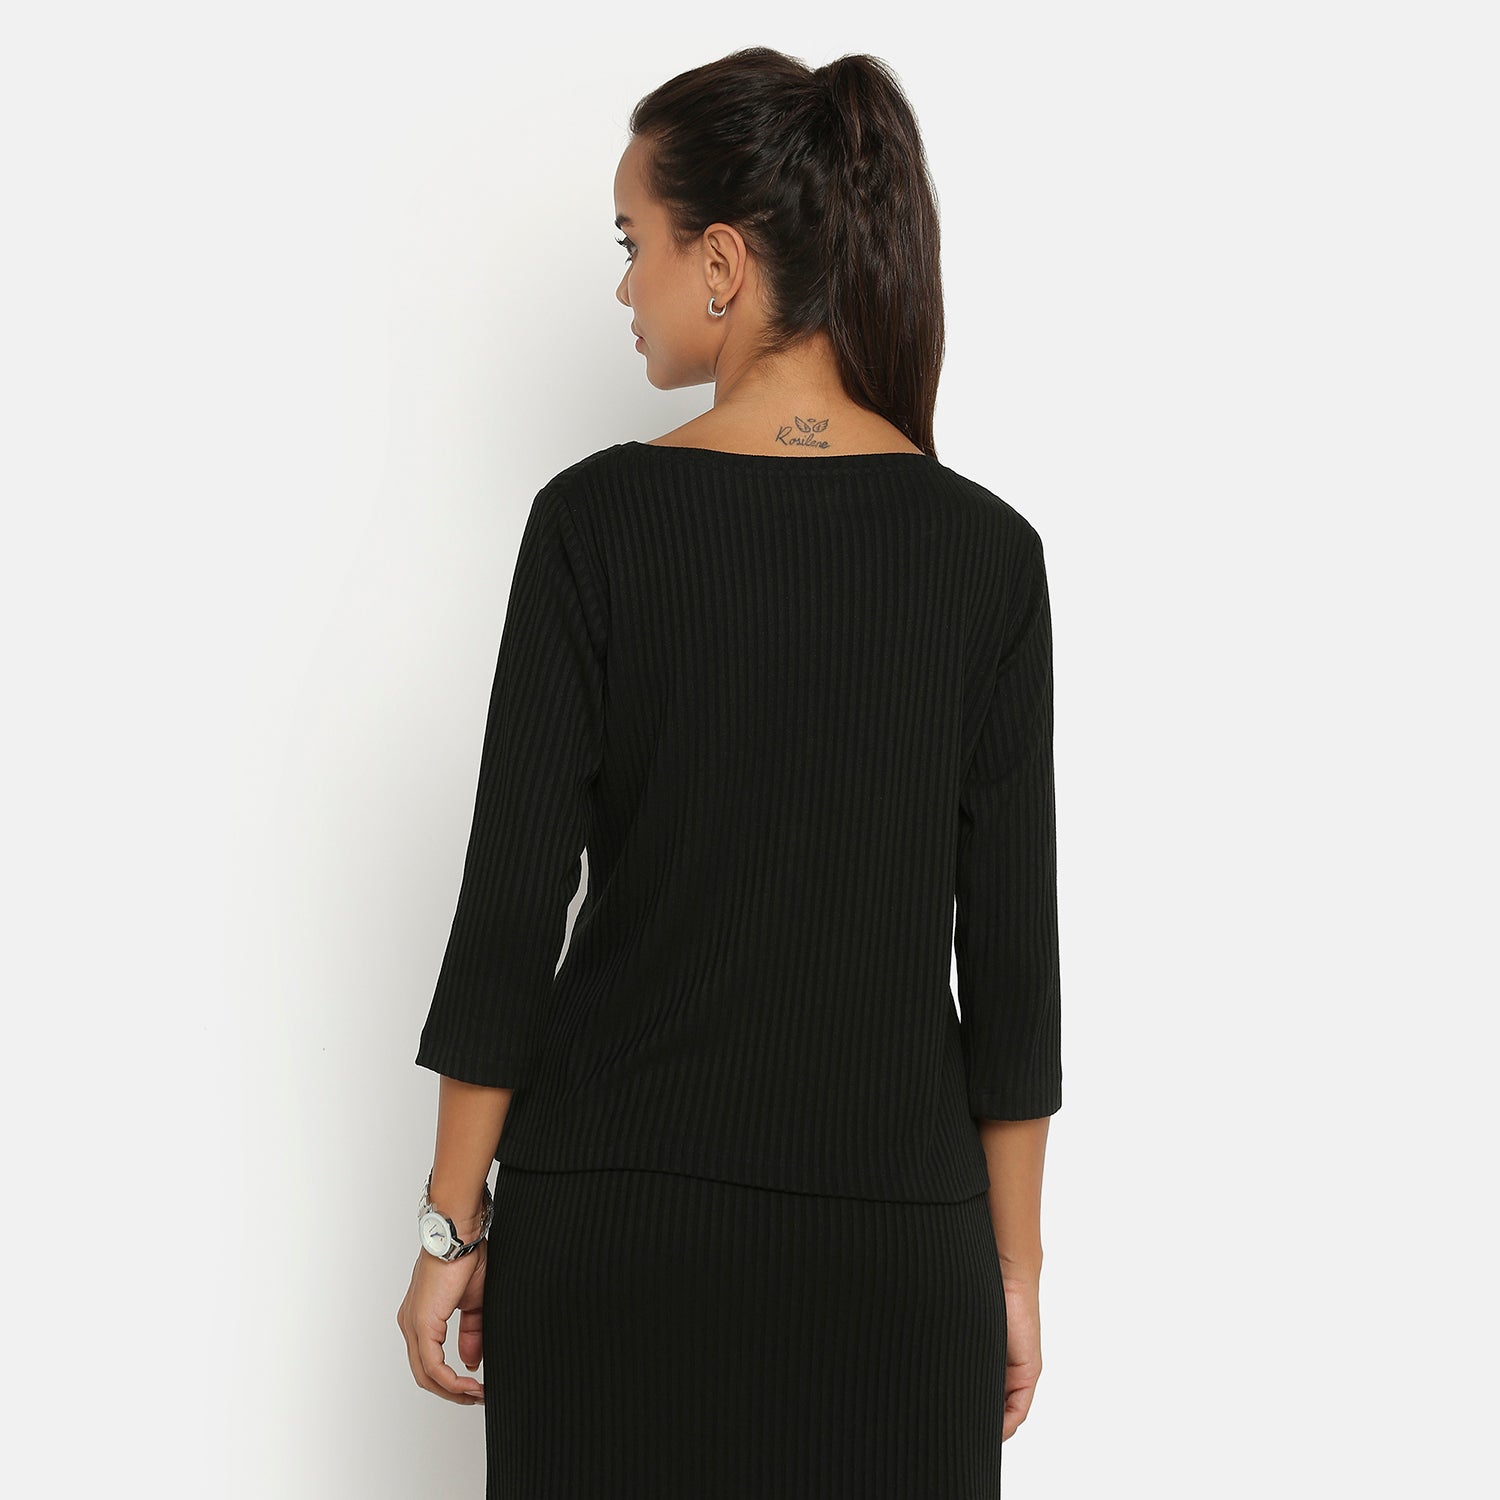 Black Ribbed Top With Sleeves